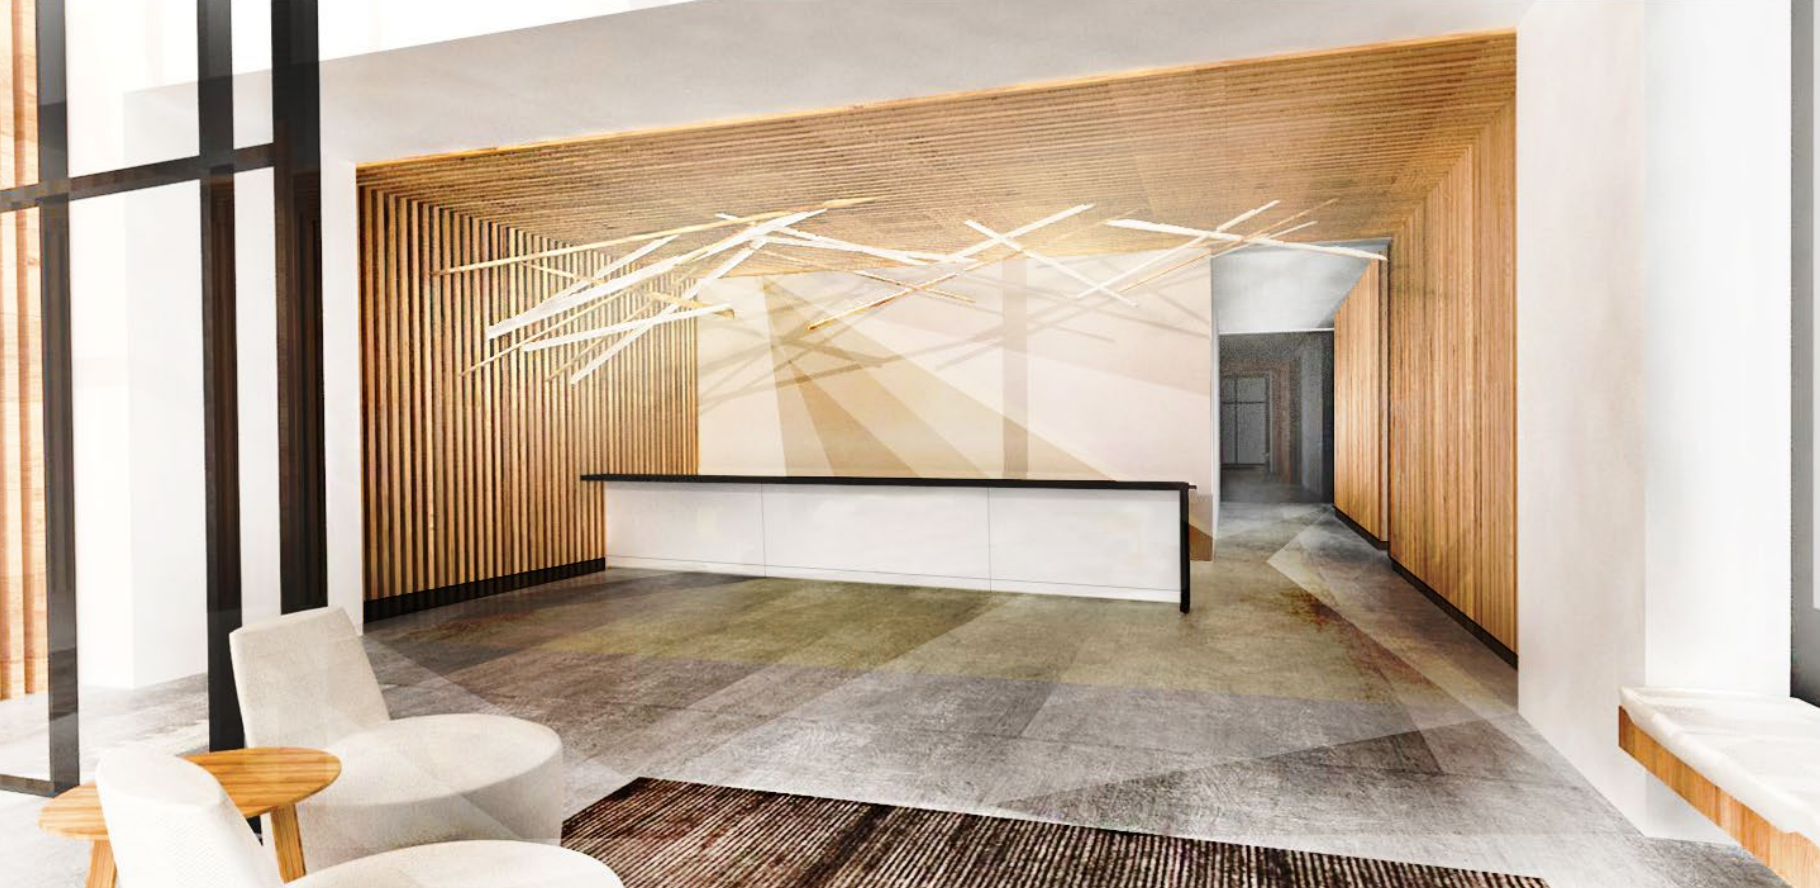 Lobby of 38 Sixth Avenue. rendering by SHoP Architects